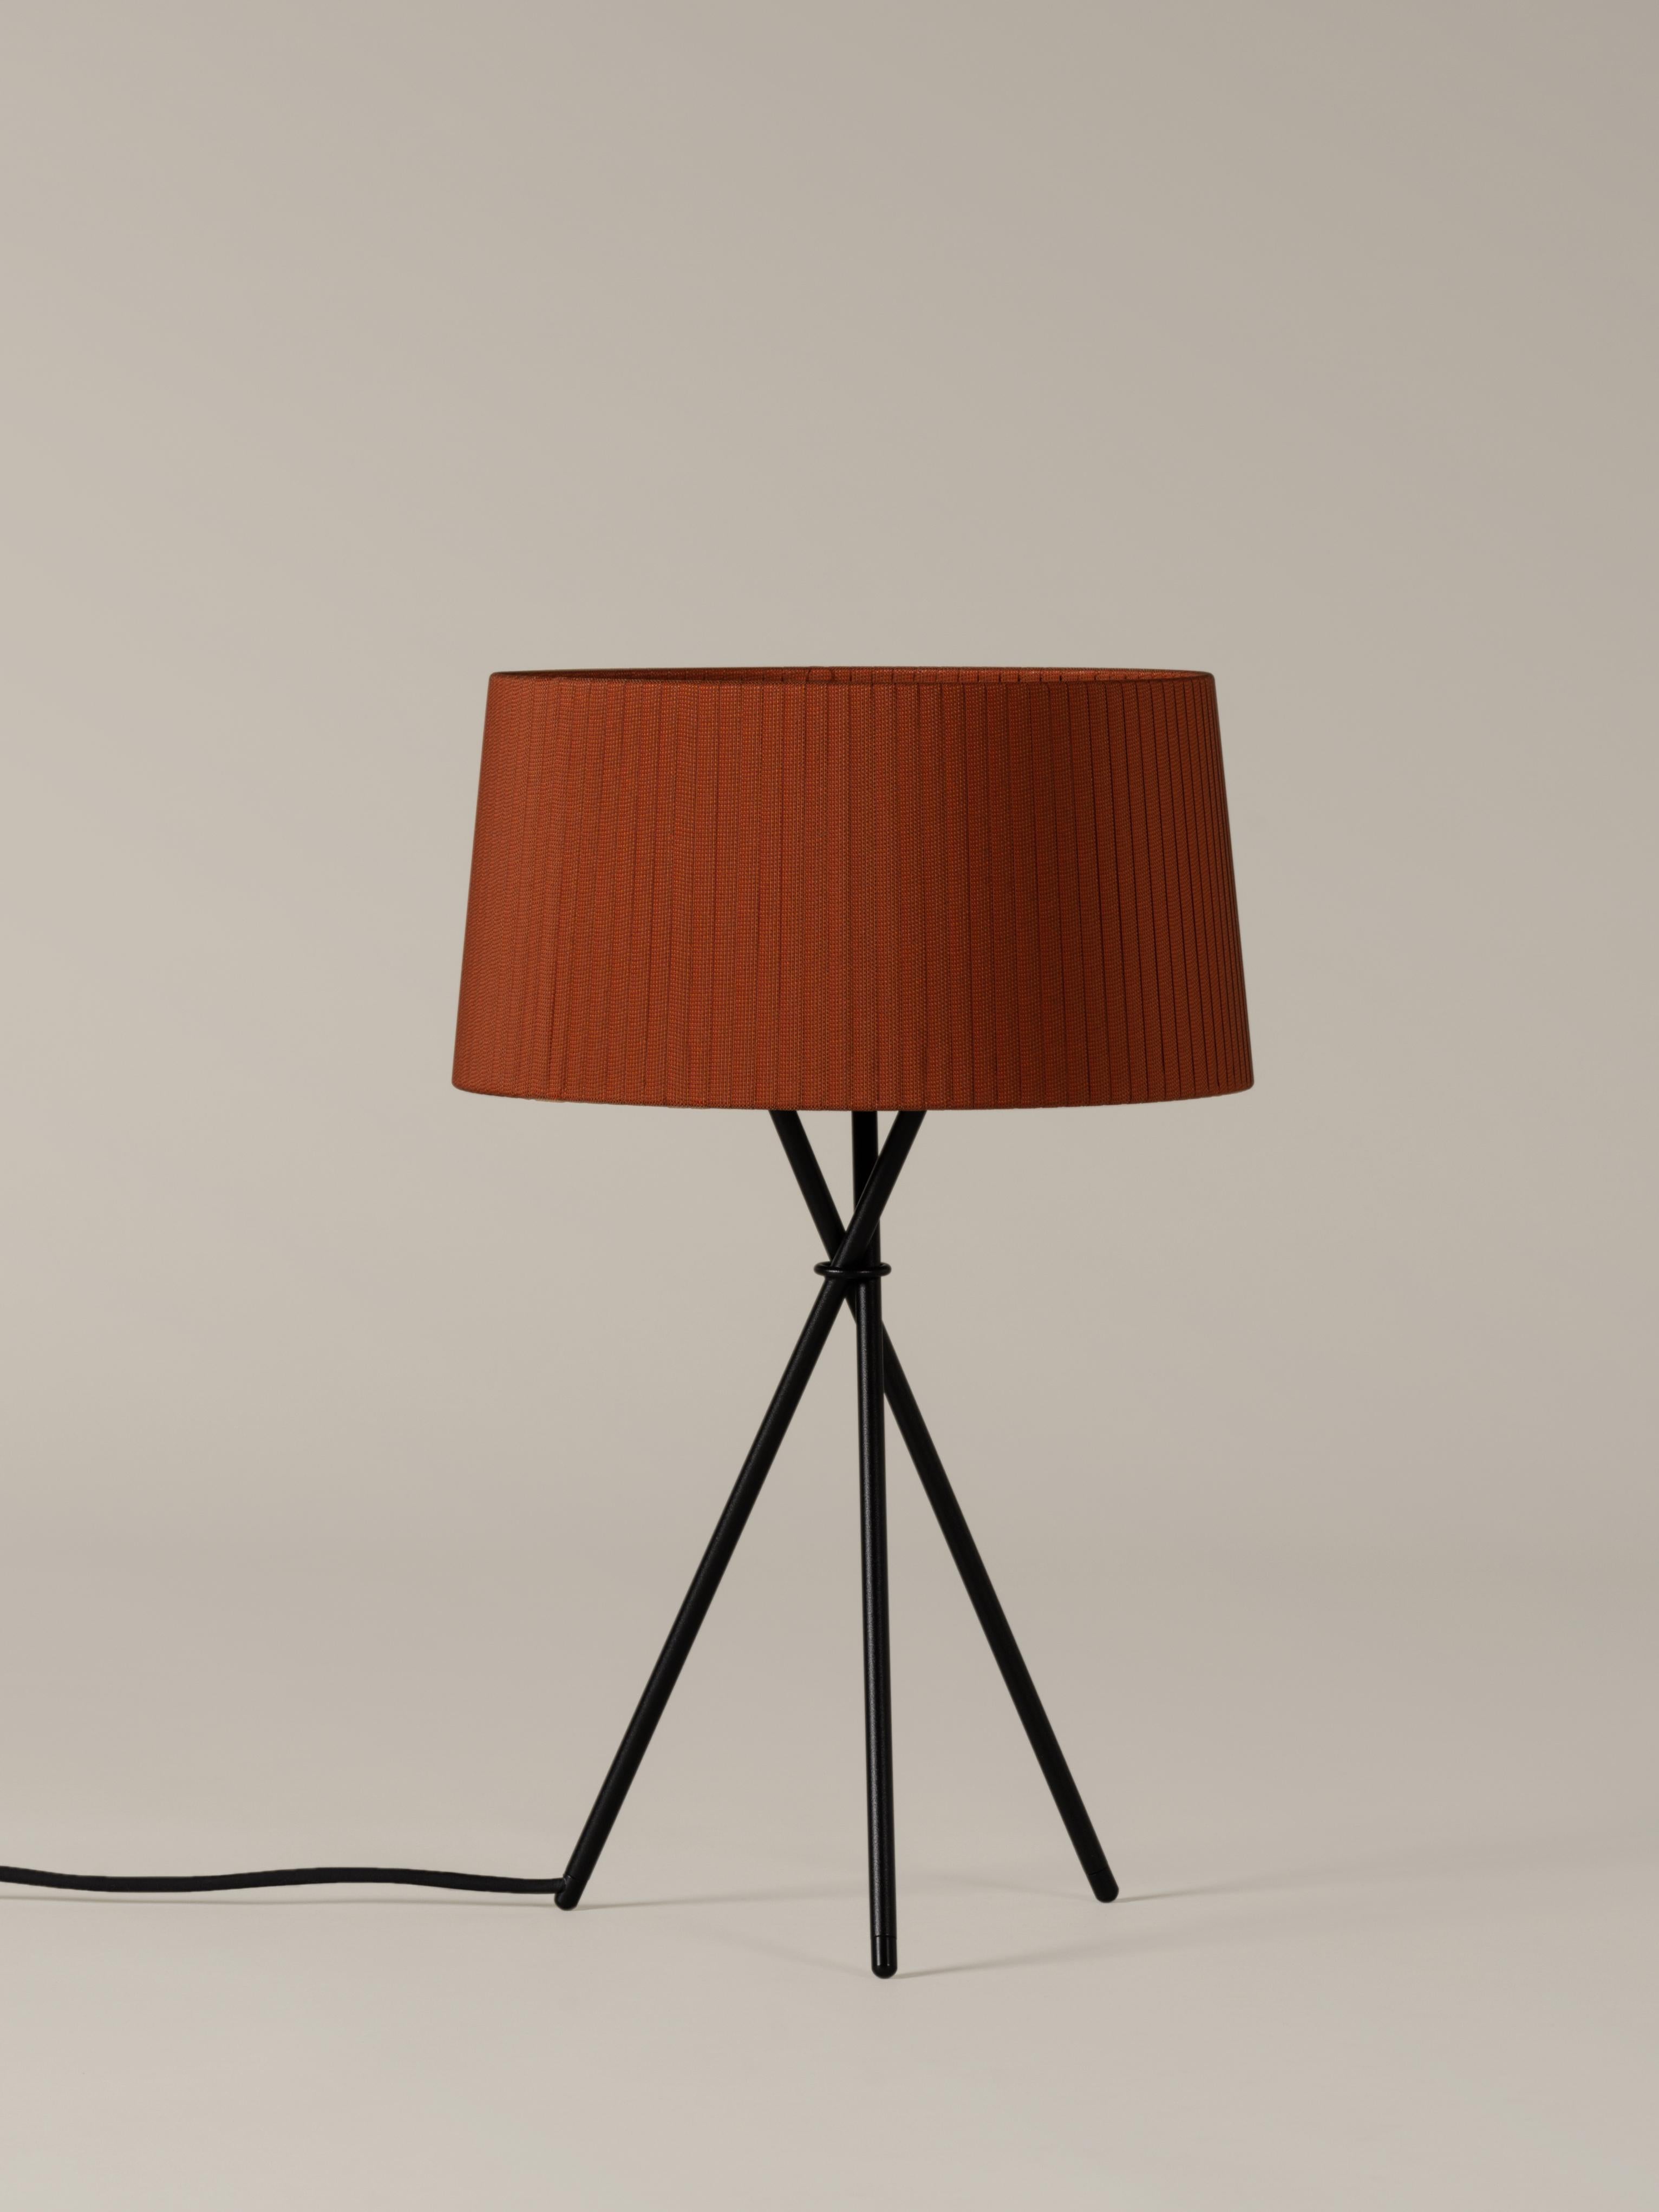 Terracotta Trípode M3 table lamp by Santa & Cole
Dimensions: D 31 x H 50 cm
Materials: Metal, ribbon.
Available in other colors.

Trípode humanises neutral spaces with its colourful and functional sobriety. The shade is hand ribboned and its